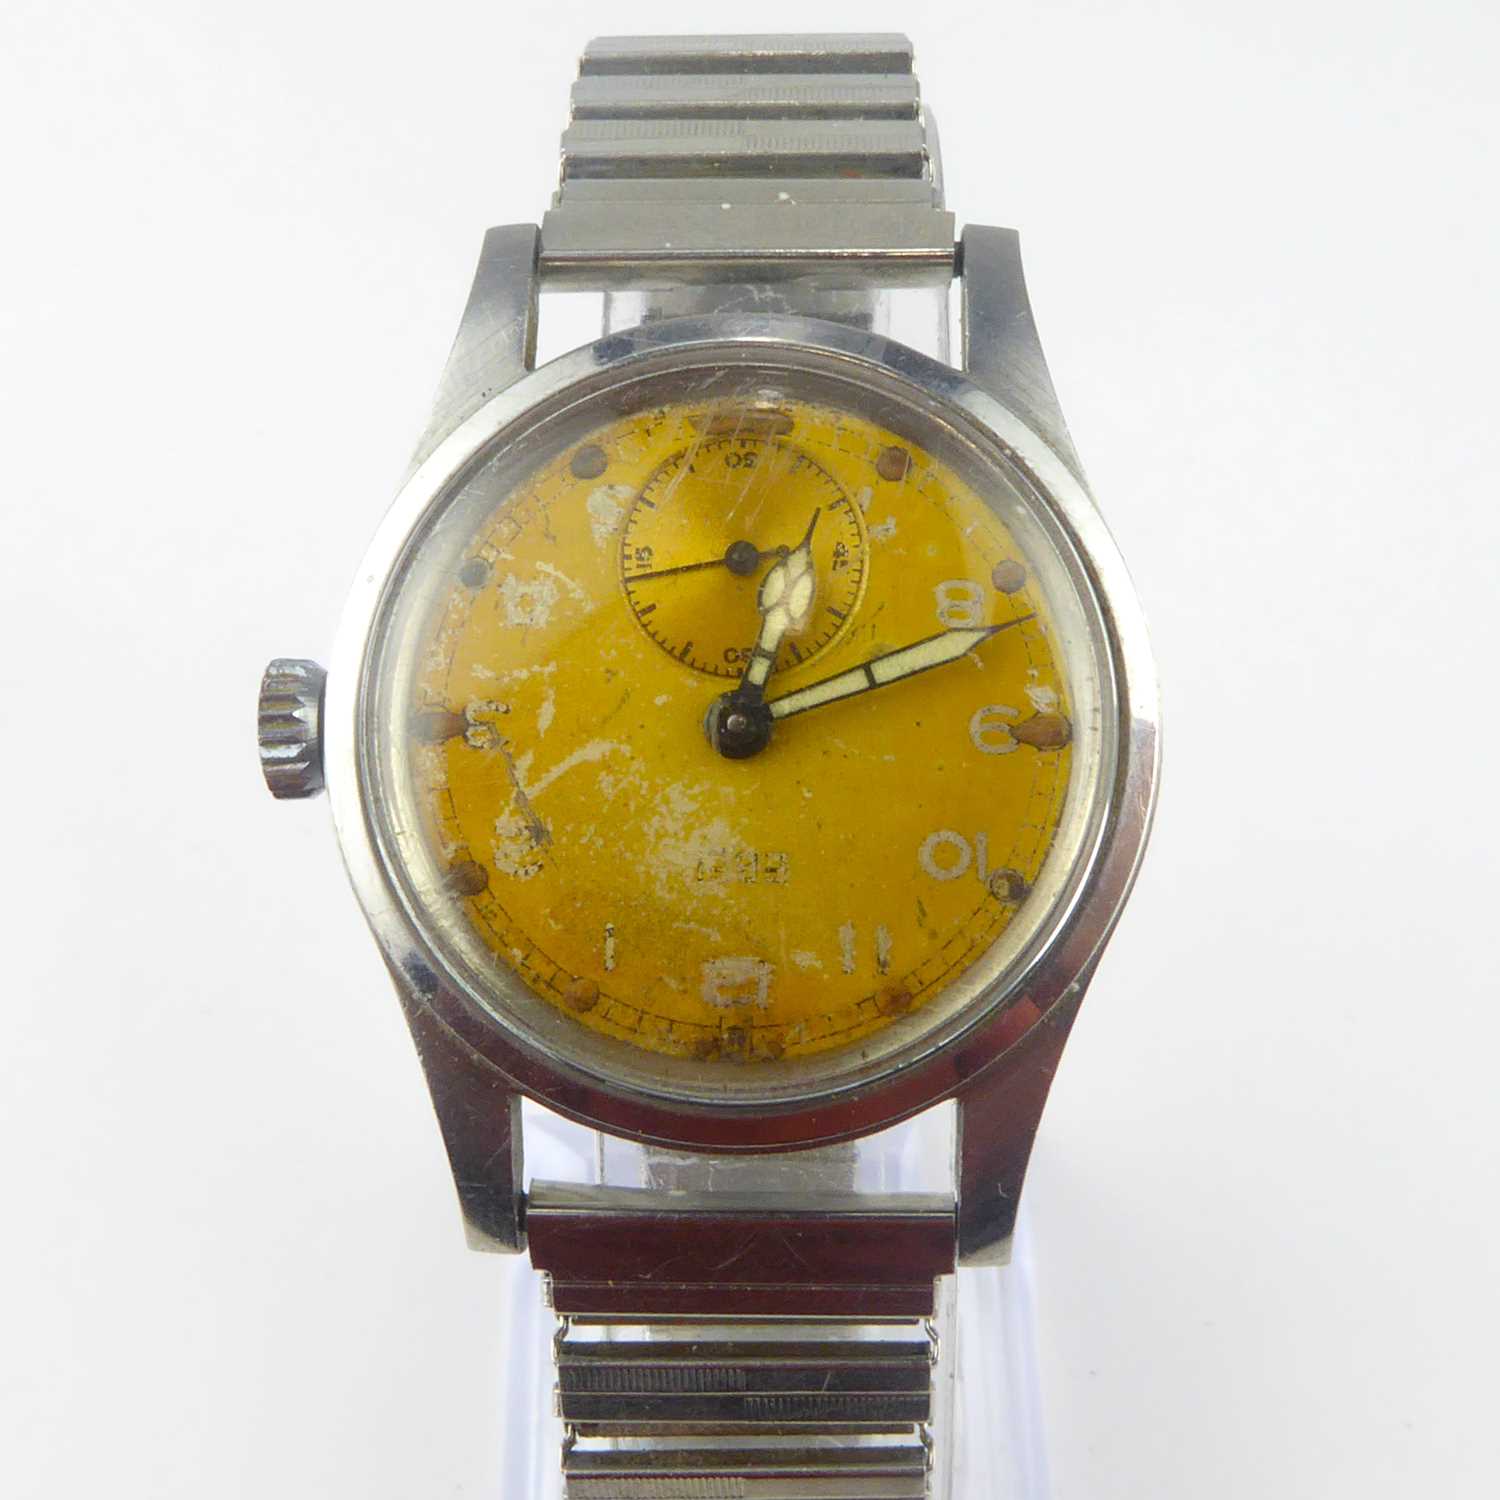 A gentlemen's vintage stainless steel crown wind wristwatch, the champagne-coloured dial set with